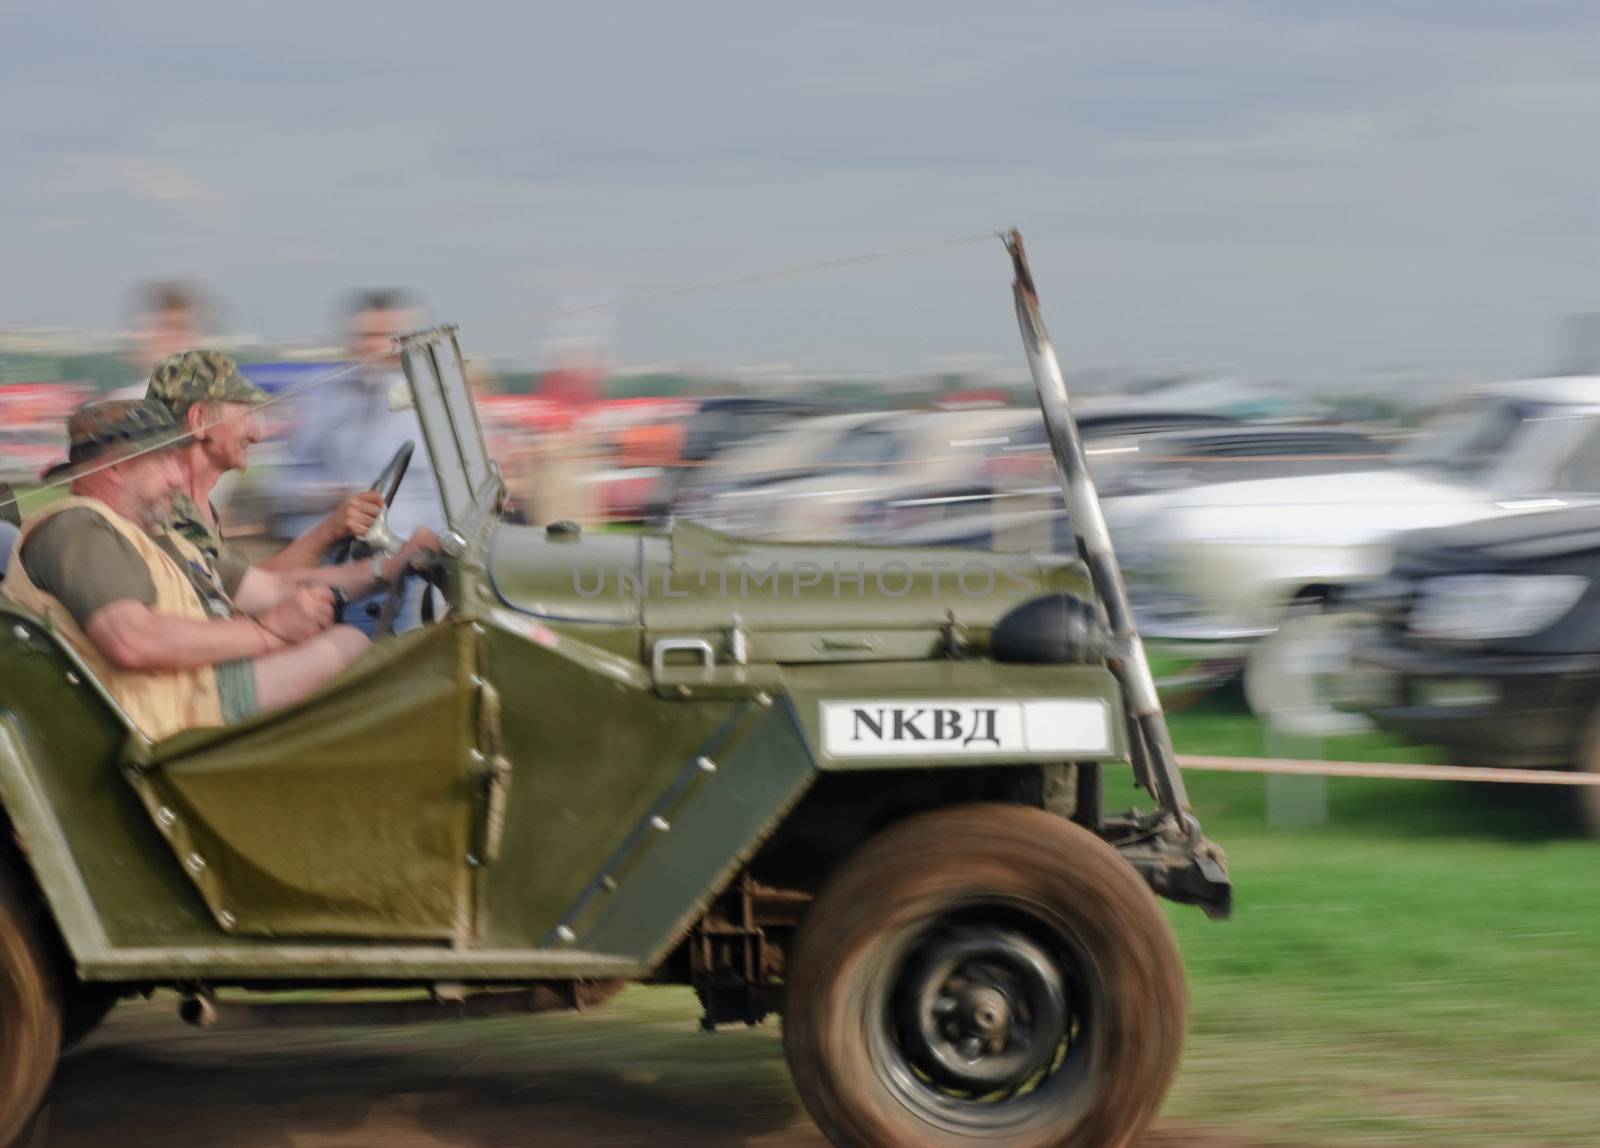 Vintage car moving at high speed against a backdrop of old cars